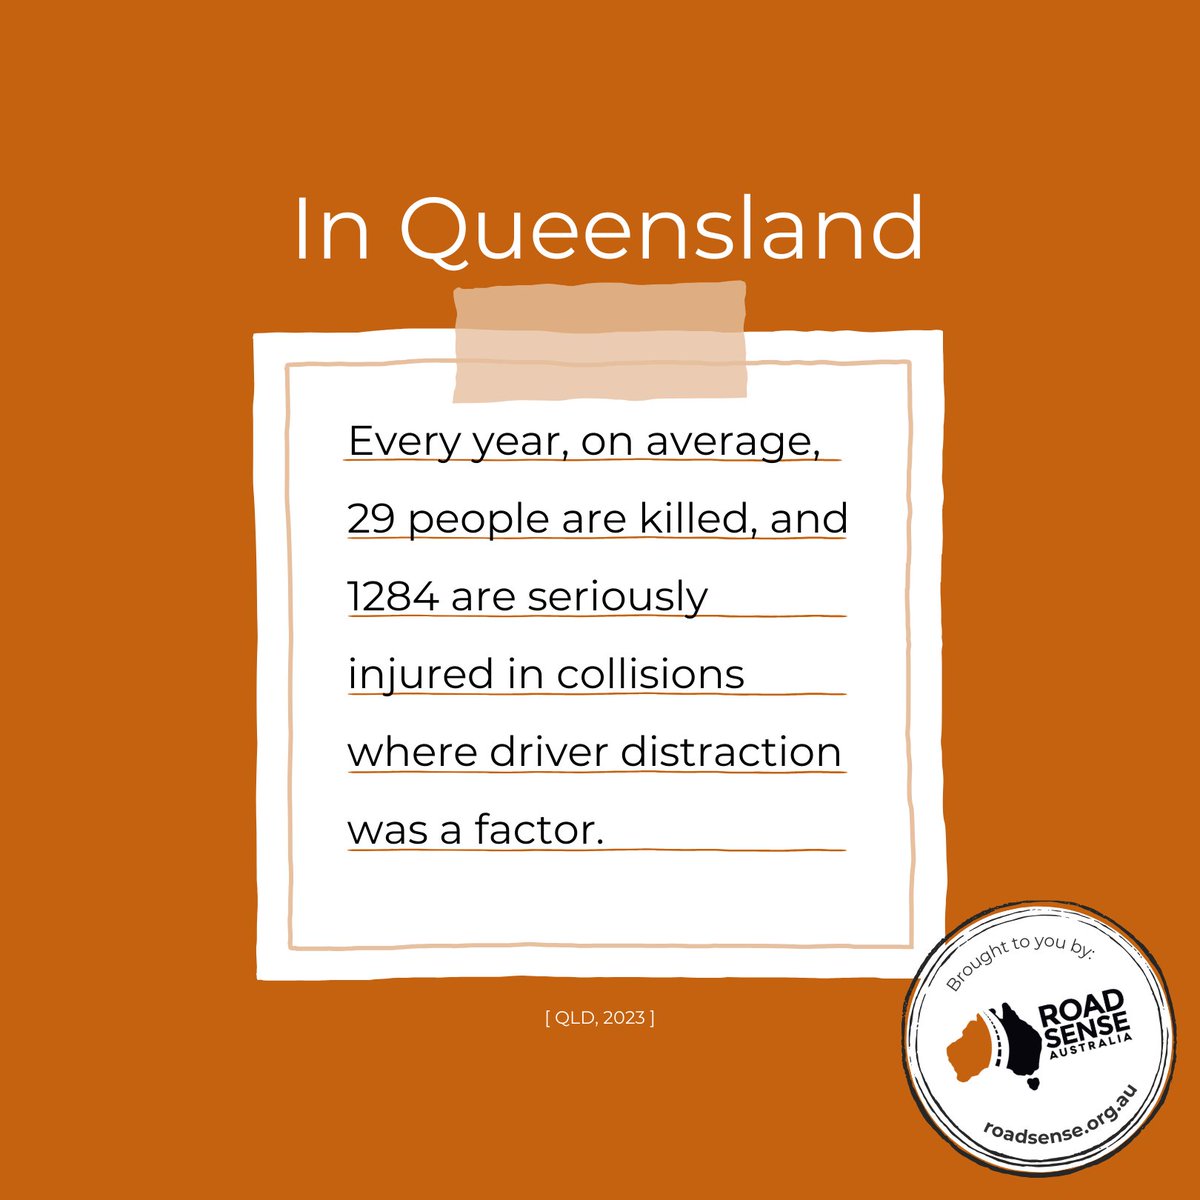 Remember that distraction isn't just being on your phone 📱, it's anything that splits your focus 🔎 from the road.

What's the most common distraction you encounter while driving?

roadsense.org.au

#roadsense #roadsenseau #roadsafety #distraction #distracteddriving